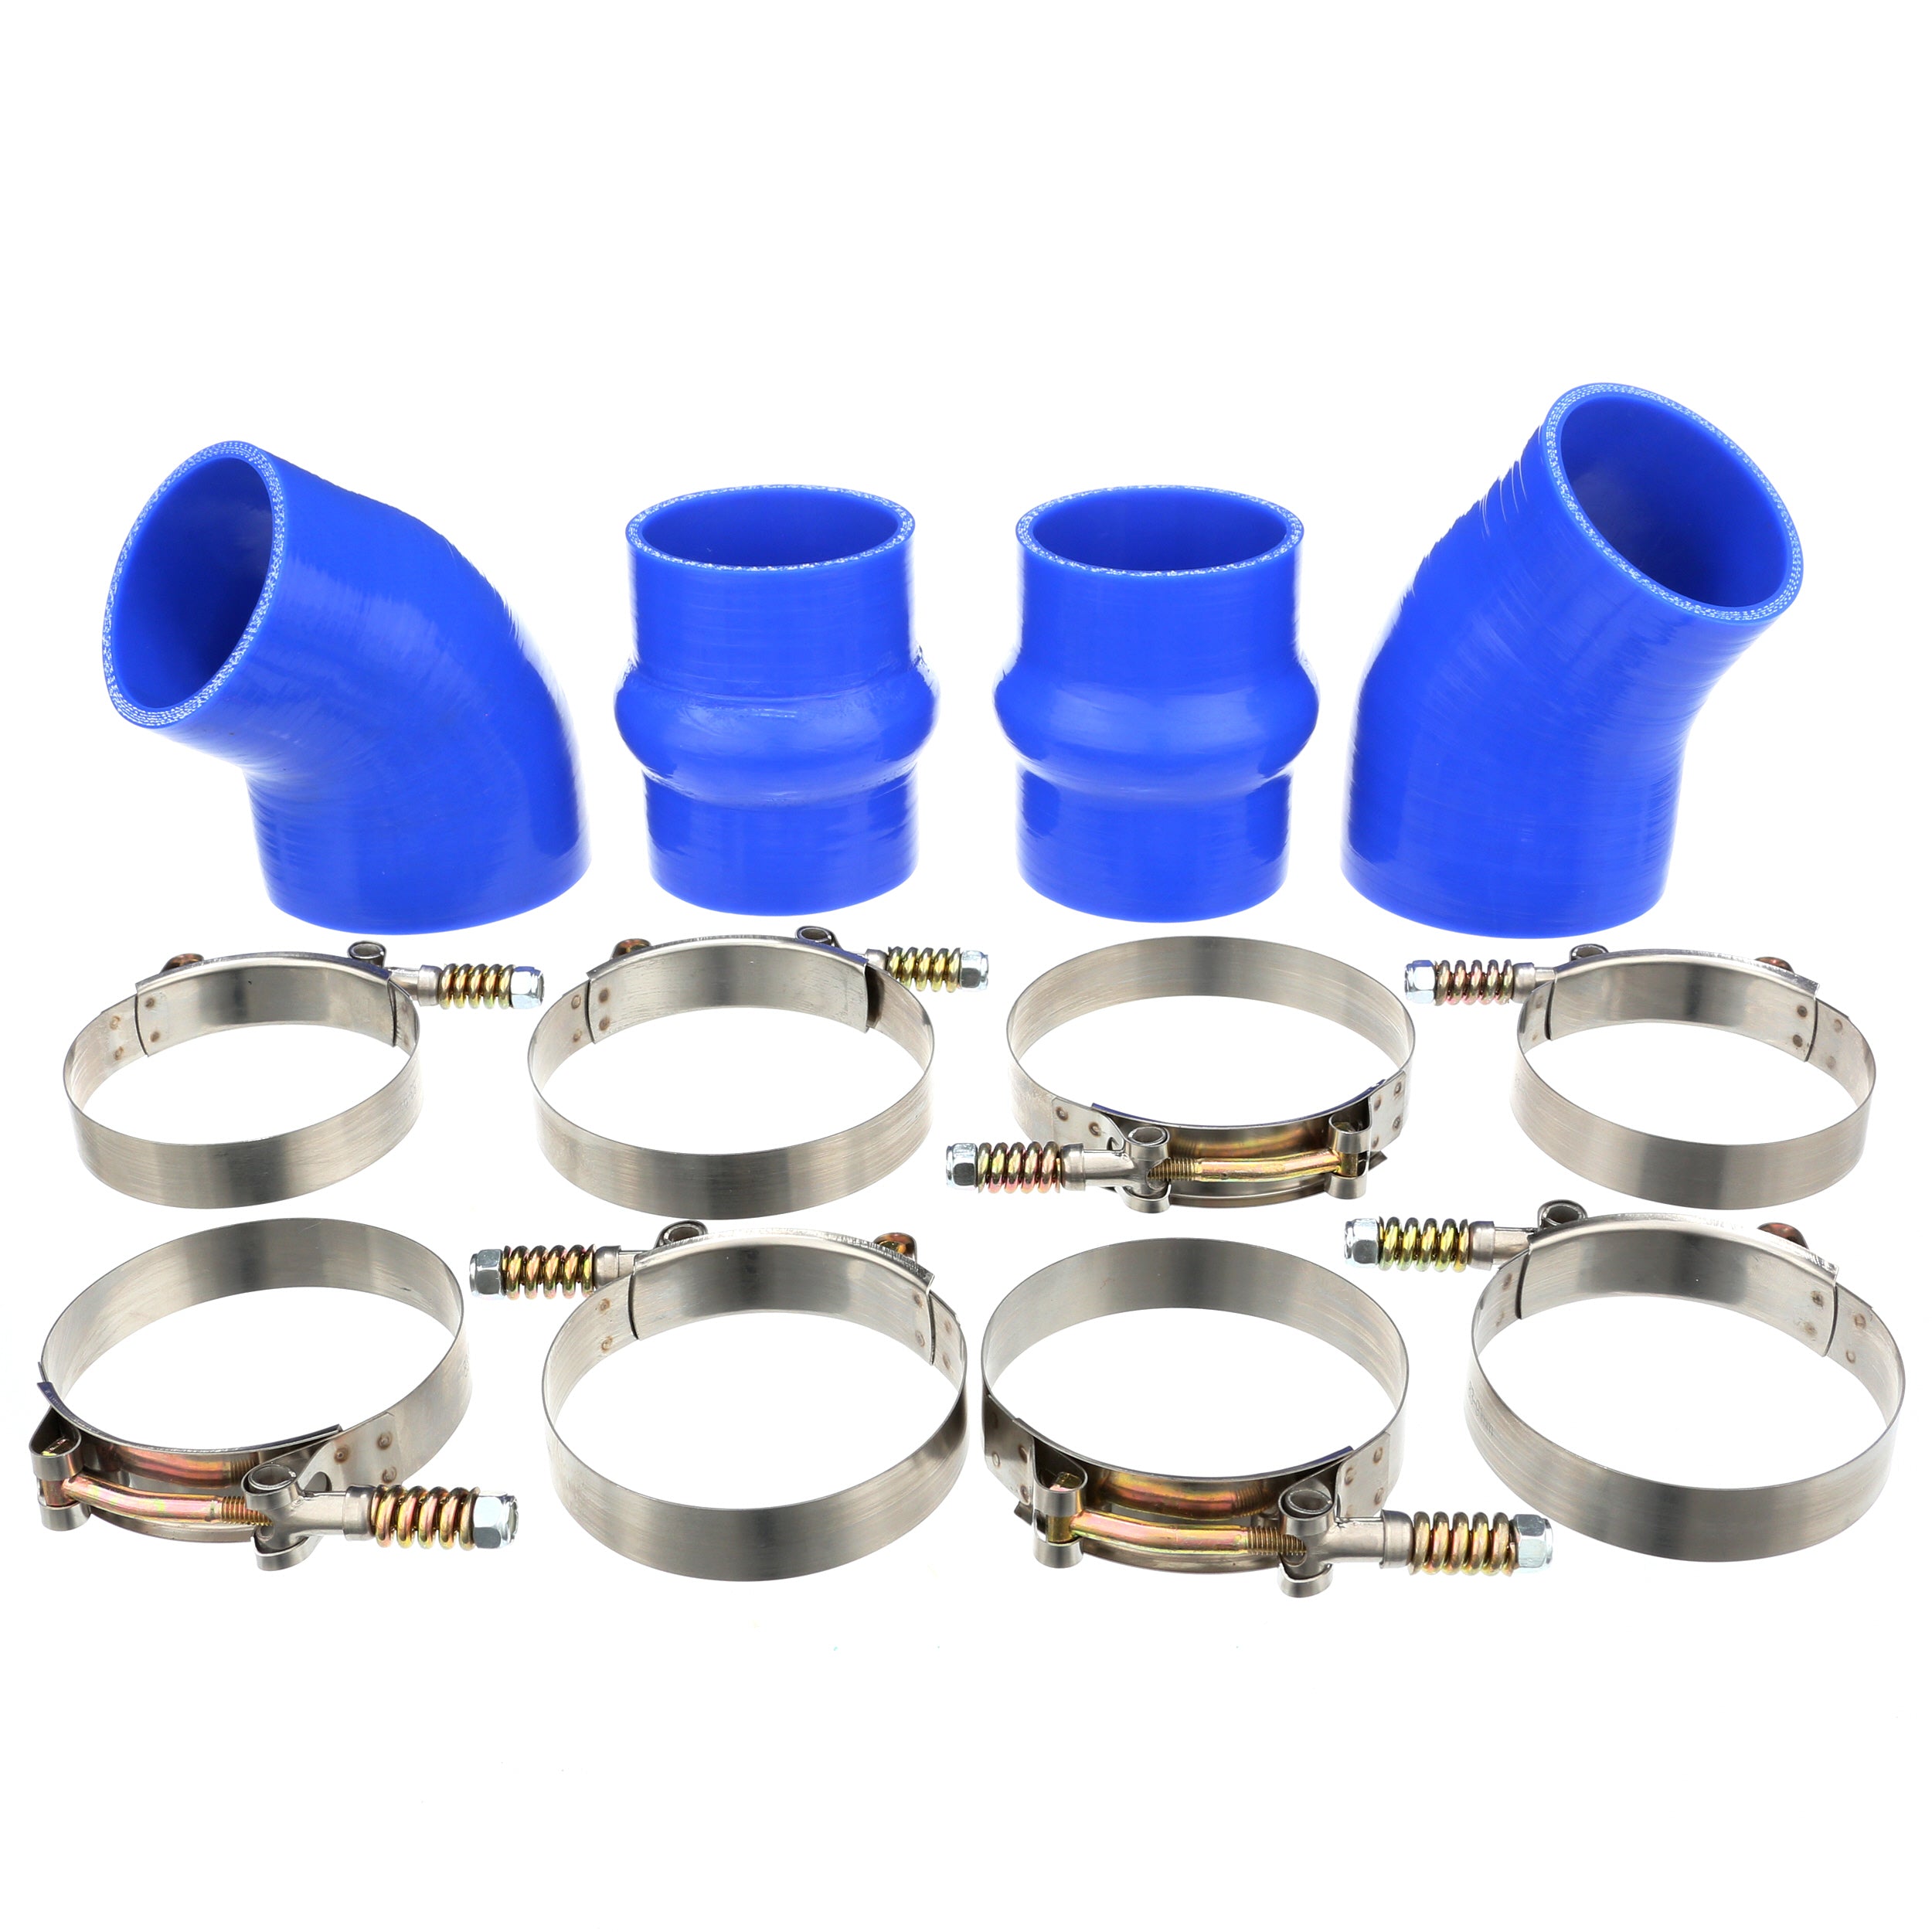 Silicone Radiator Hose and Intercooler Boot Kit For 98-02 Dodge Ram Cummins 5.9L